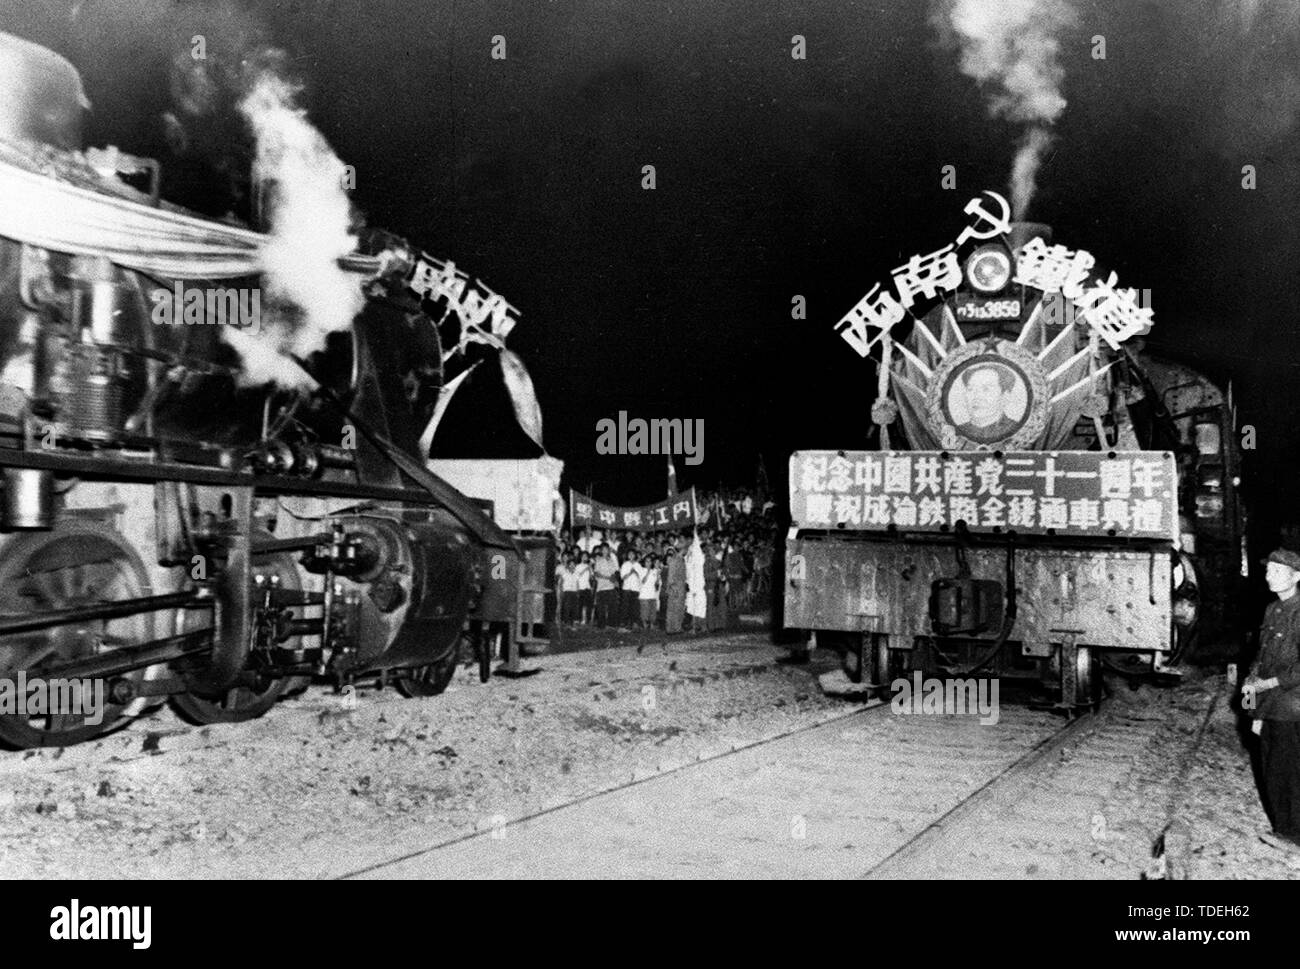 (190615) -- CHONGQING, June 15, 2019 (Xinhua) -- File photo shows that two trains coming respectively from Chengdu and Chongqing meet at Neijiang Railway Station along the Chengdu-Chongqing railway, July 1, 1952. Connecting Chengdu of southwest China's Sichuan Province and Chongqing Municipality, the 505-km Chengdu-Chongqing railway is the first railway line contructed after the founding of the People's Republic of China. It was designed by China and built with domestic materials.     The construction of the railway kicked off in June 1950, and the whole project was finished in two years, with Stock Photo